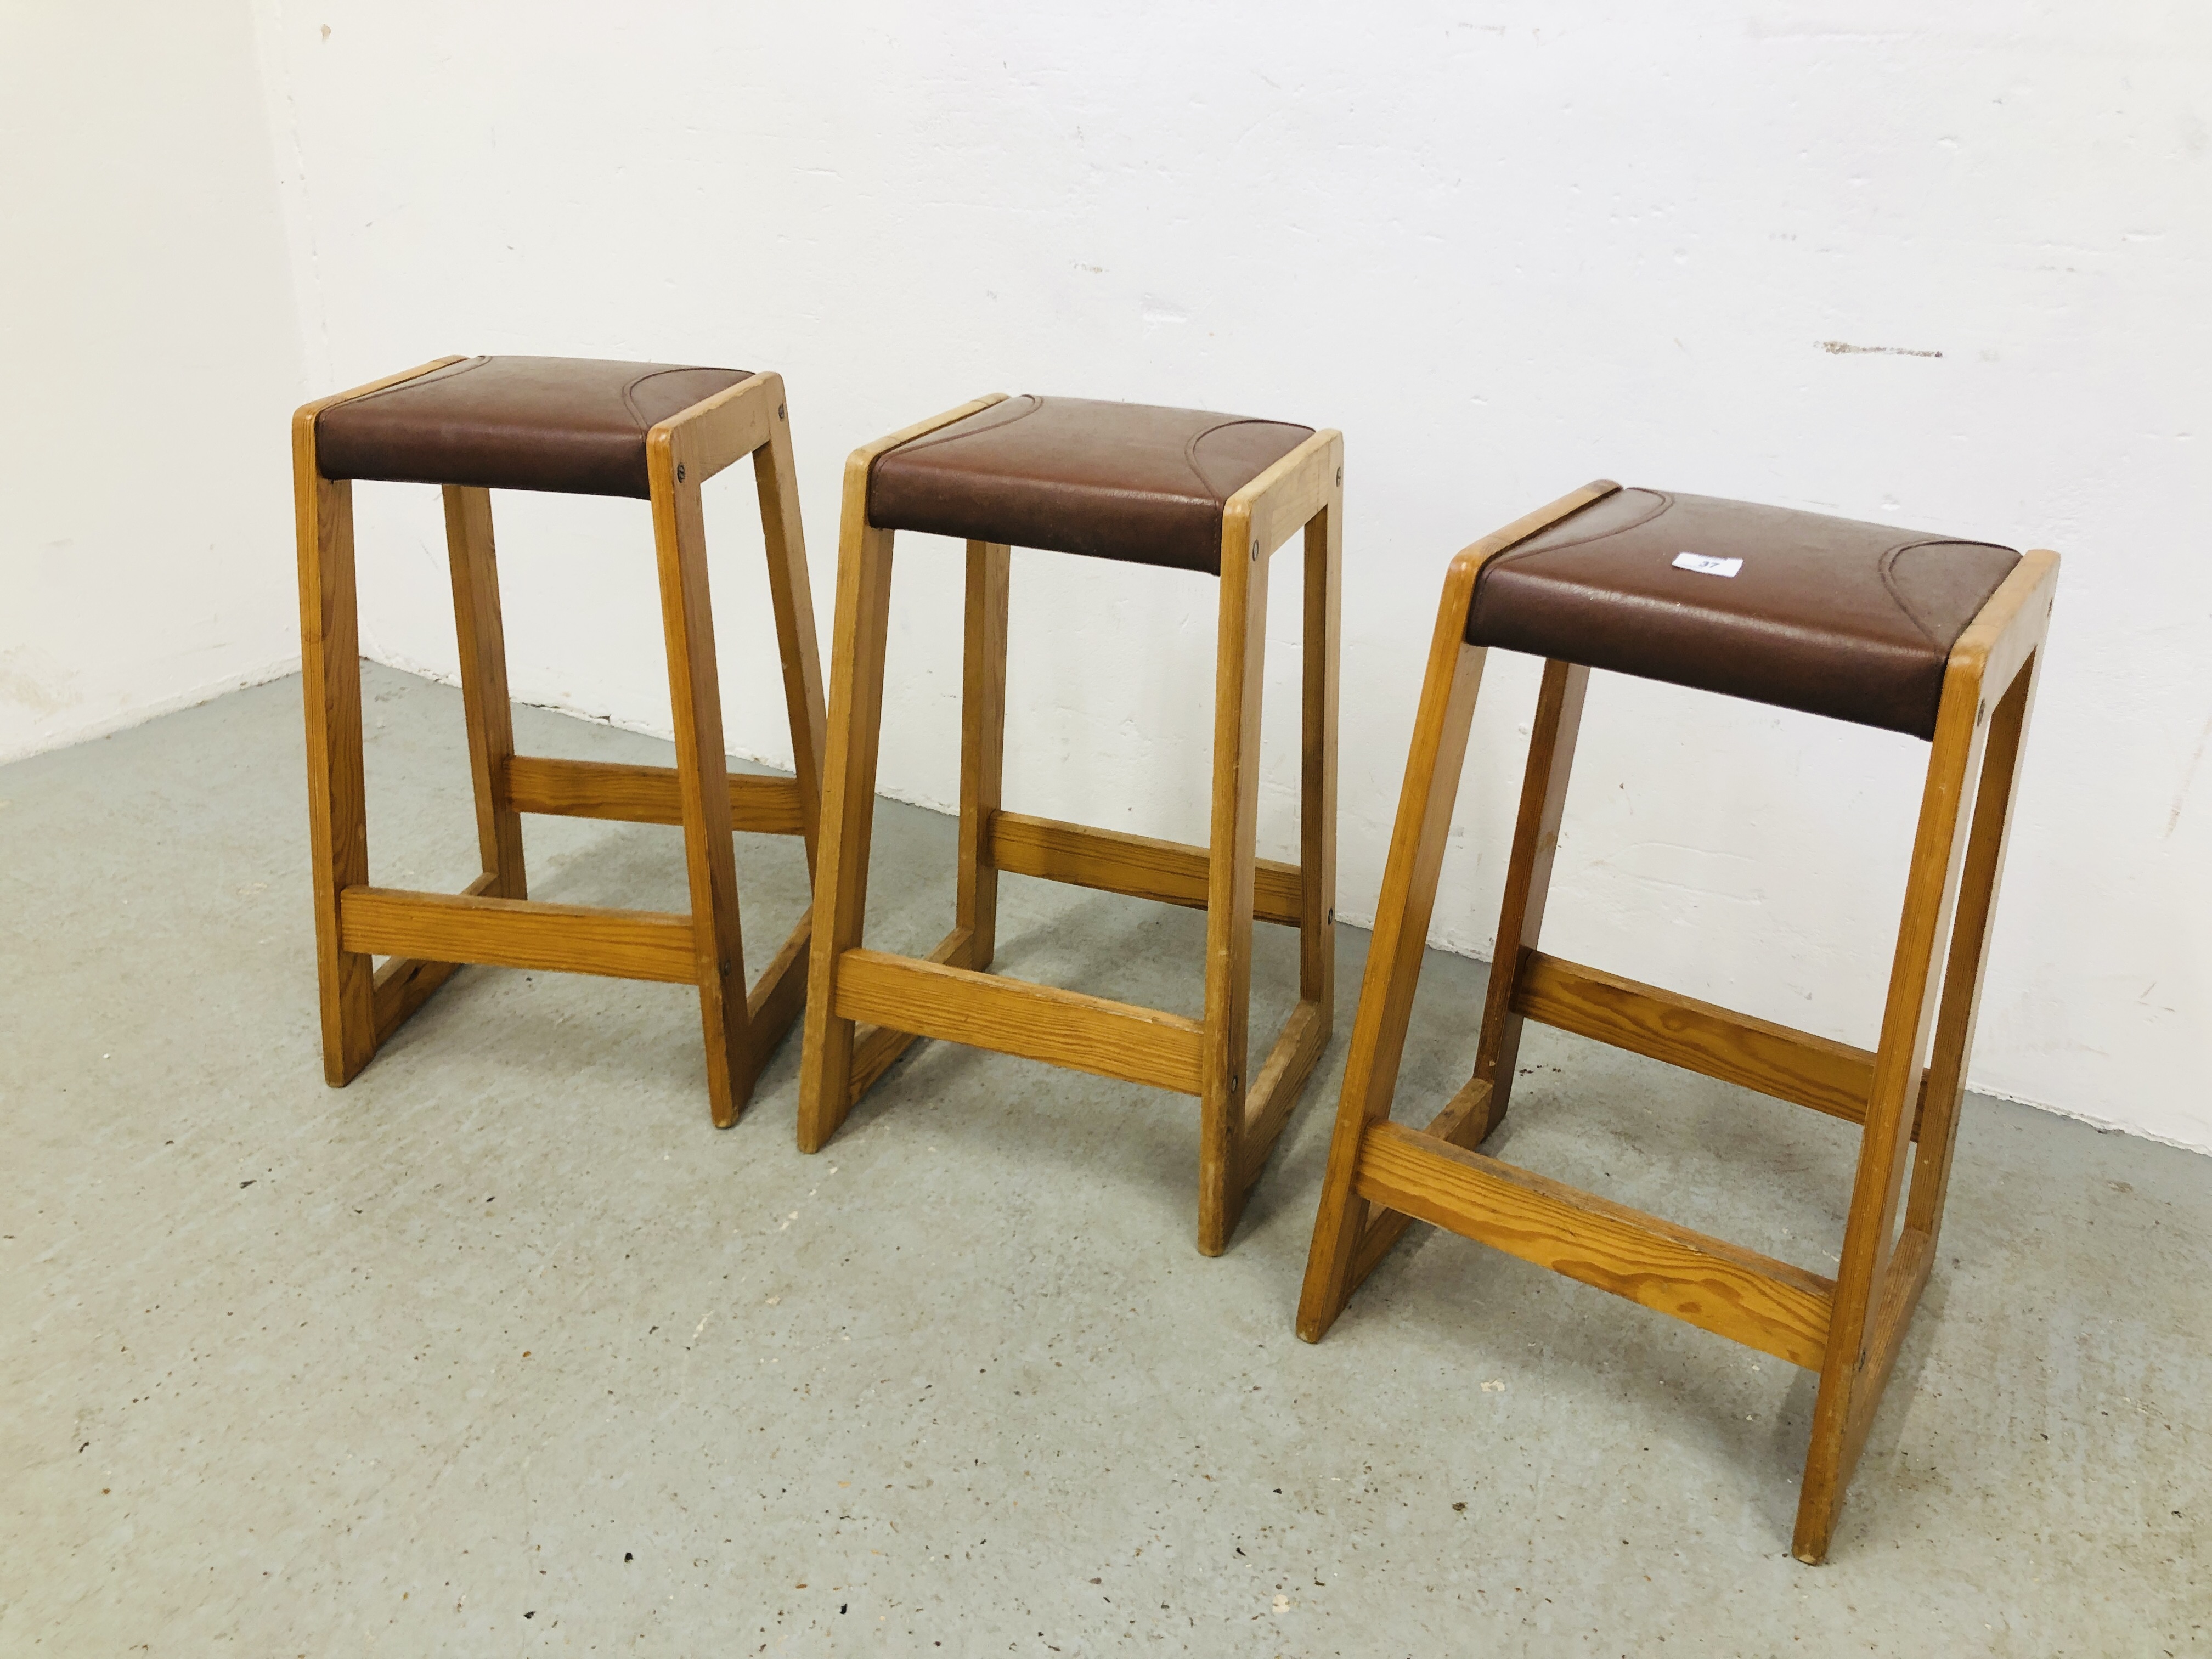 THREE PINE FRAMED BREAKFAST BAR STOOLS WITH BROWN LEATHER PADDED SEAT HEIGHT 62CM.